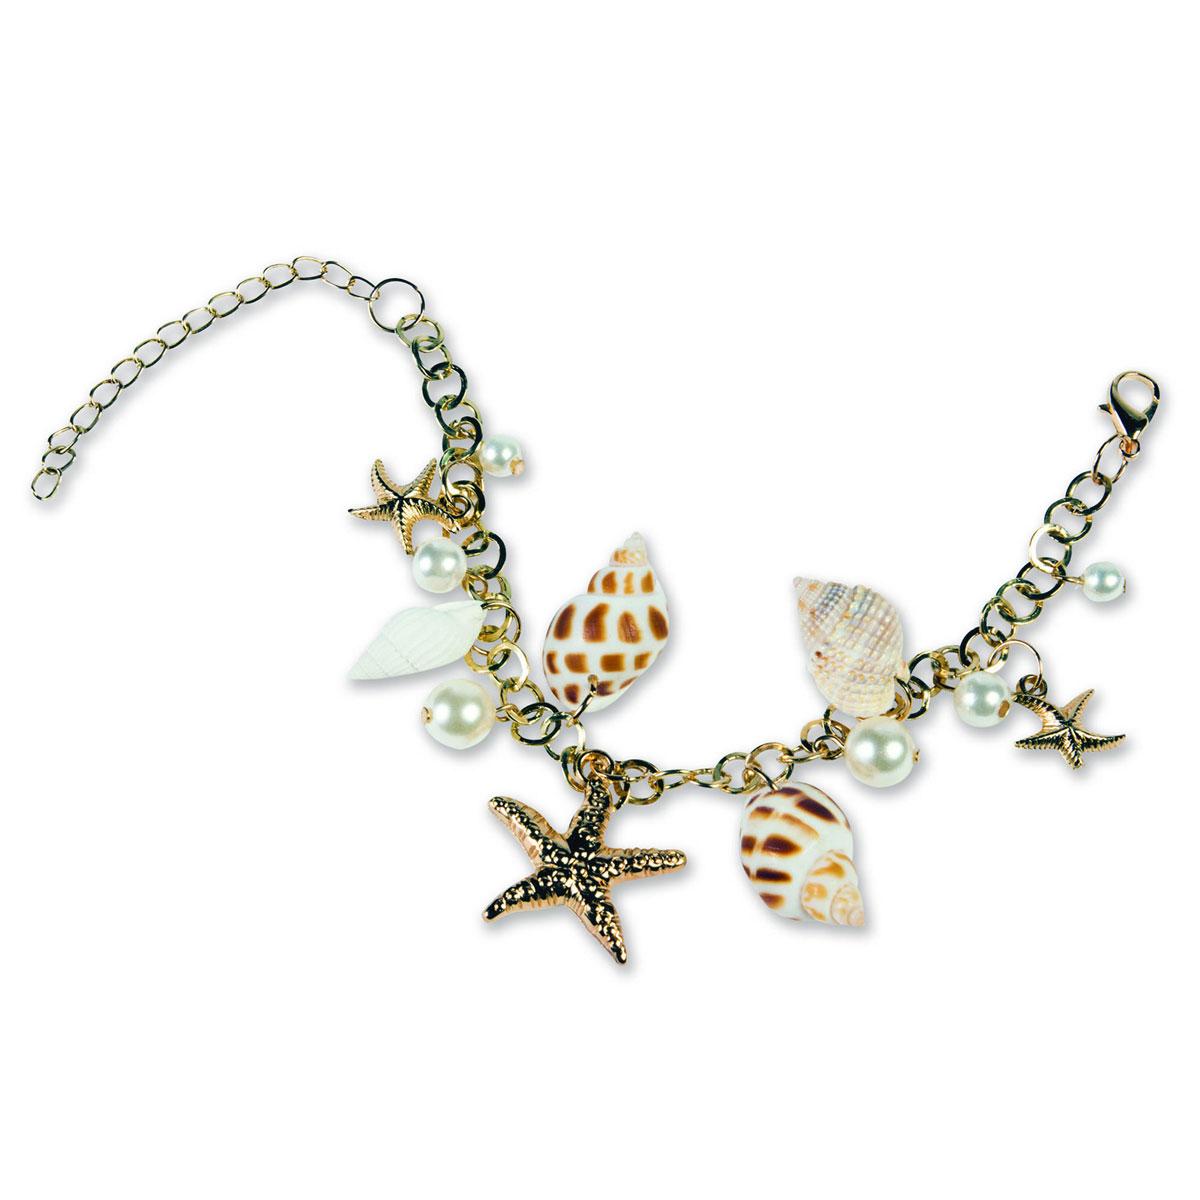 Mermaid Bracelet with real shells by Forum Novelties 75004 available here at Karnival Costumes online party shop